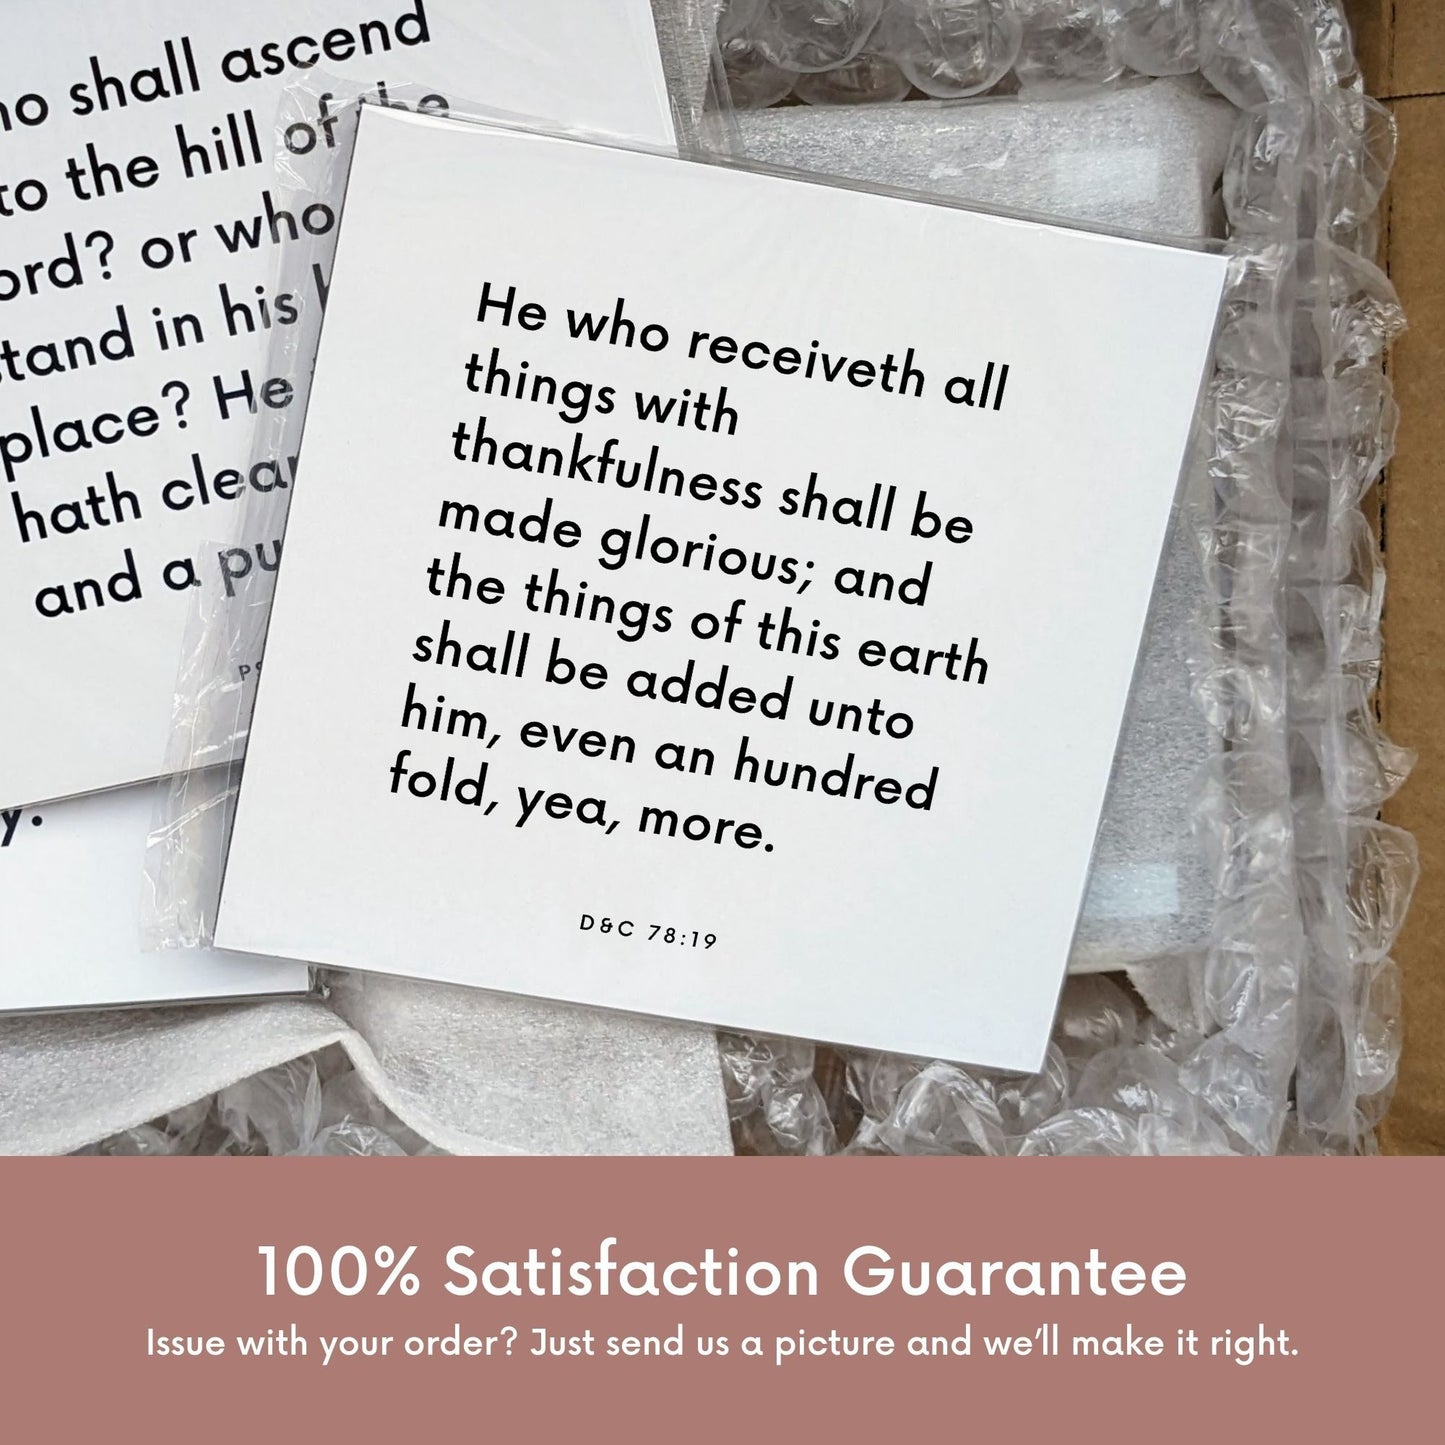 Shipping materials for scripture tile of D&C 78:19 - "He who receiveth all things with thankfulness"